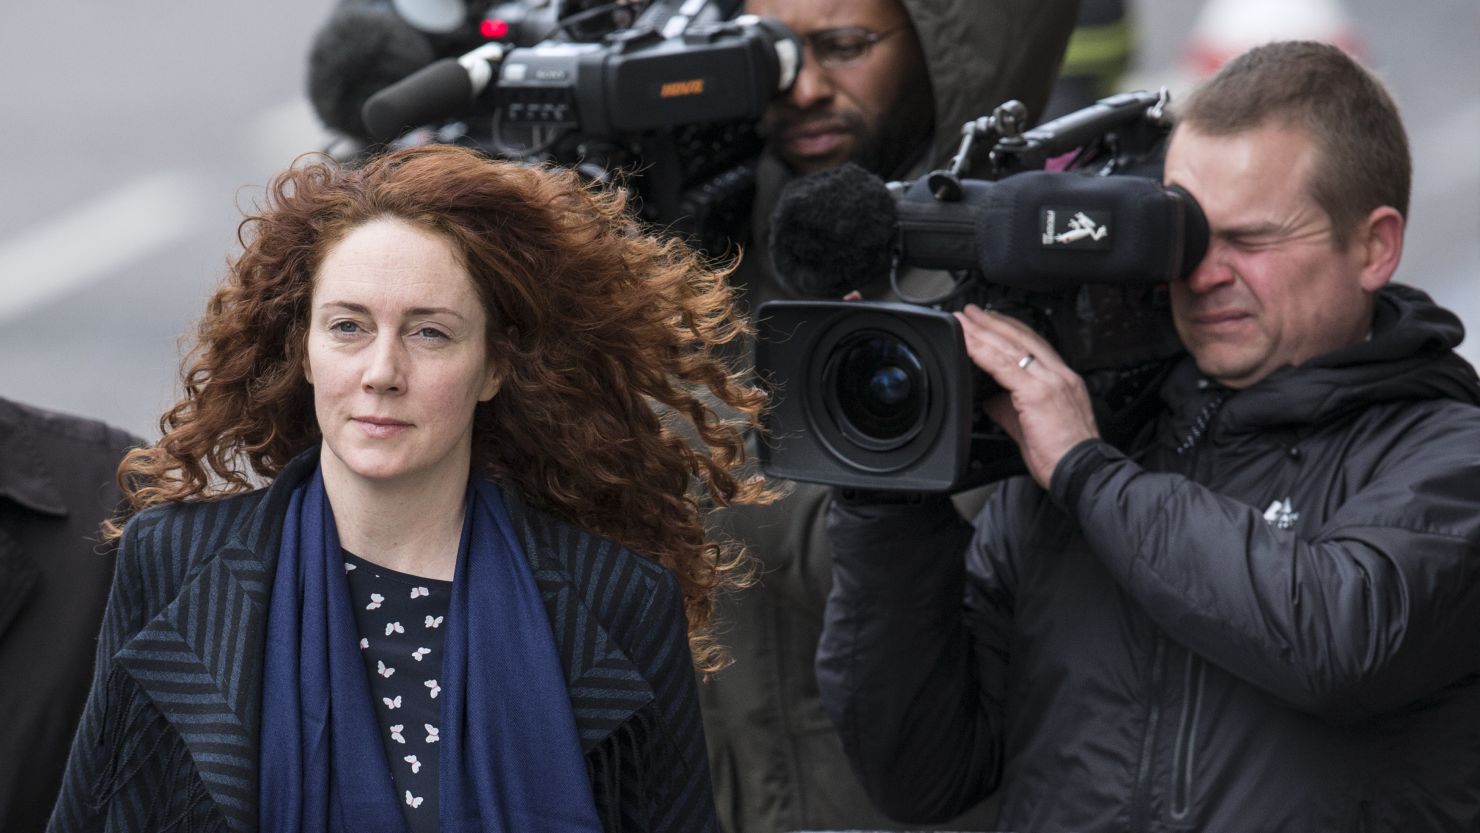 Chasing stories on soccer star David Beckham for rival papers put a strain on the relationship between former newspaper chief Rebekah Brooks (above) and ex-Downing Street spin doctor Andy Coulson.